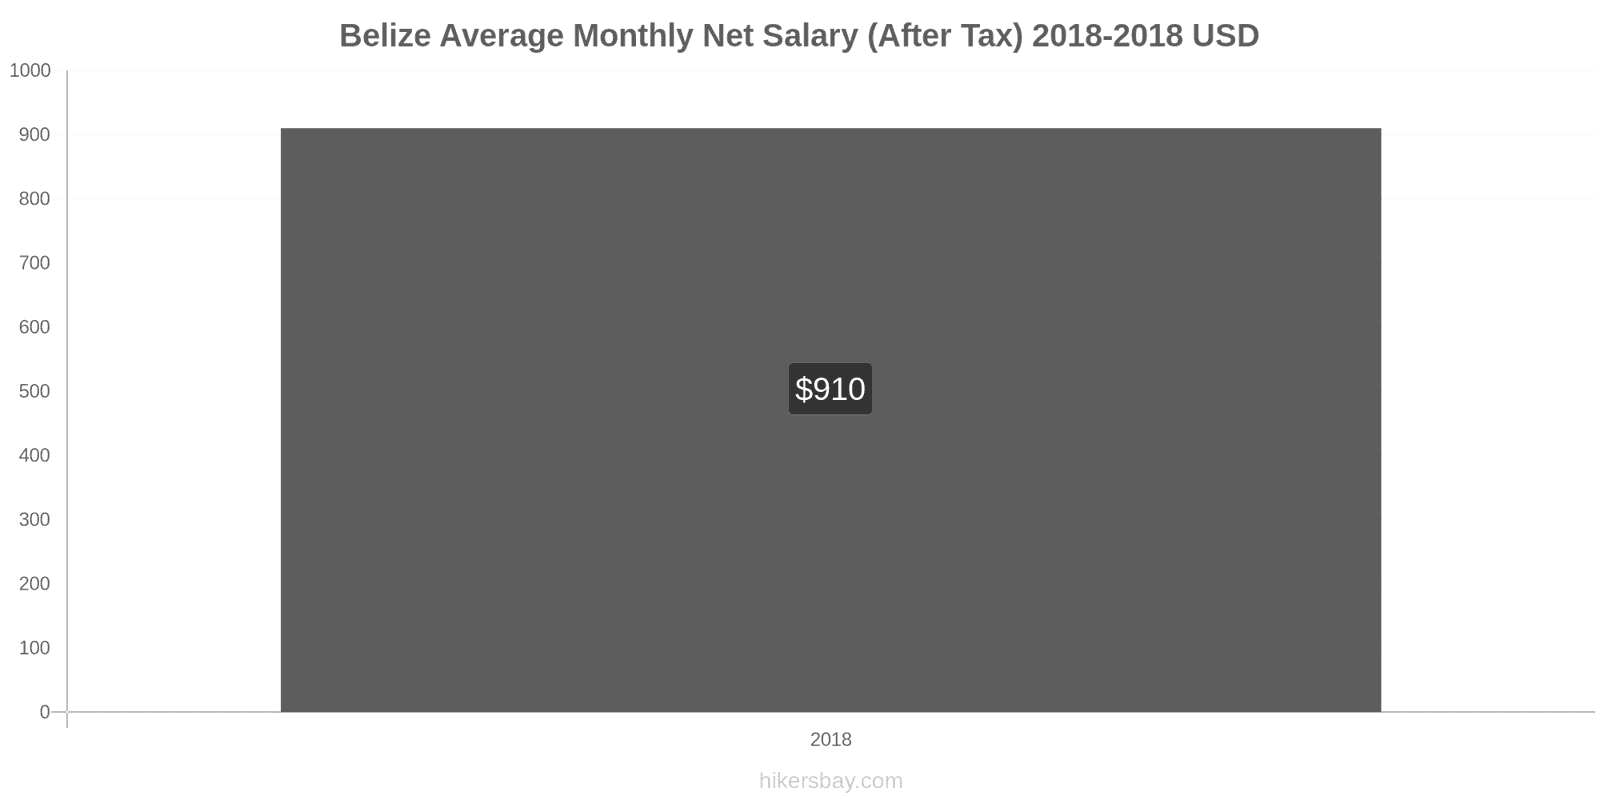 Belize price changes Average Monthly Net Salary (After Tax) hikersbay.com